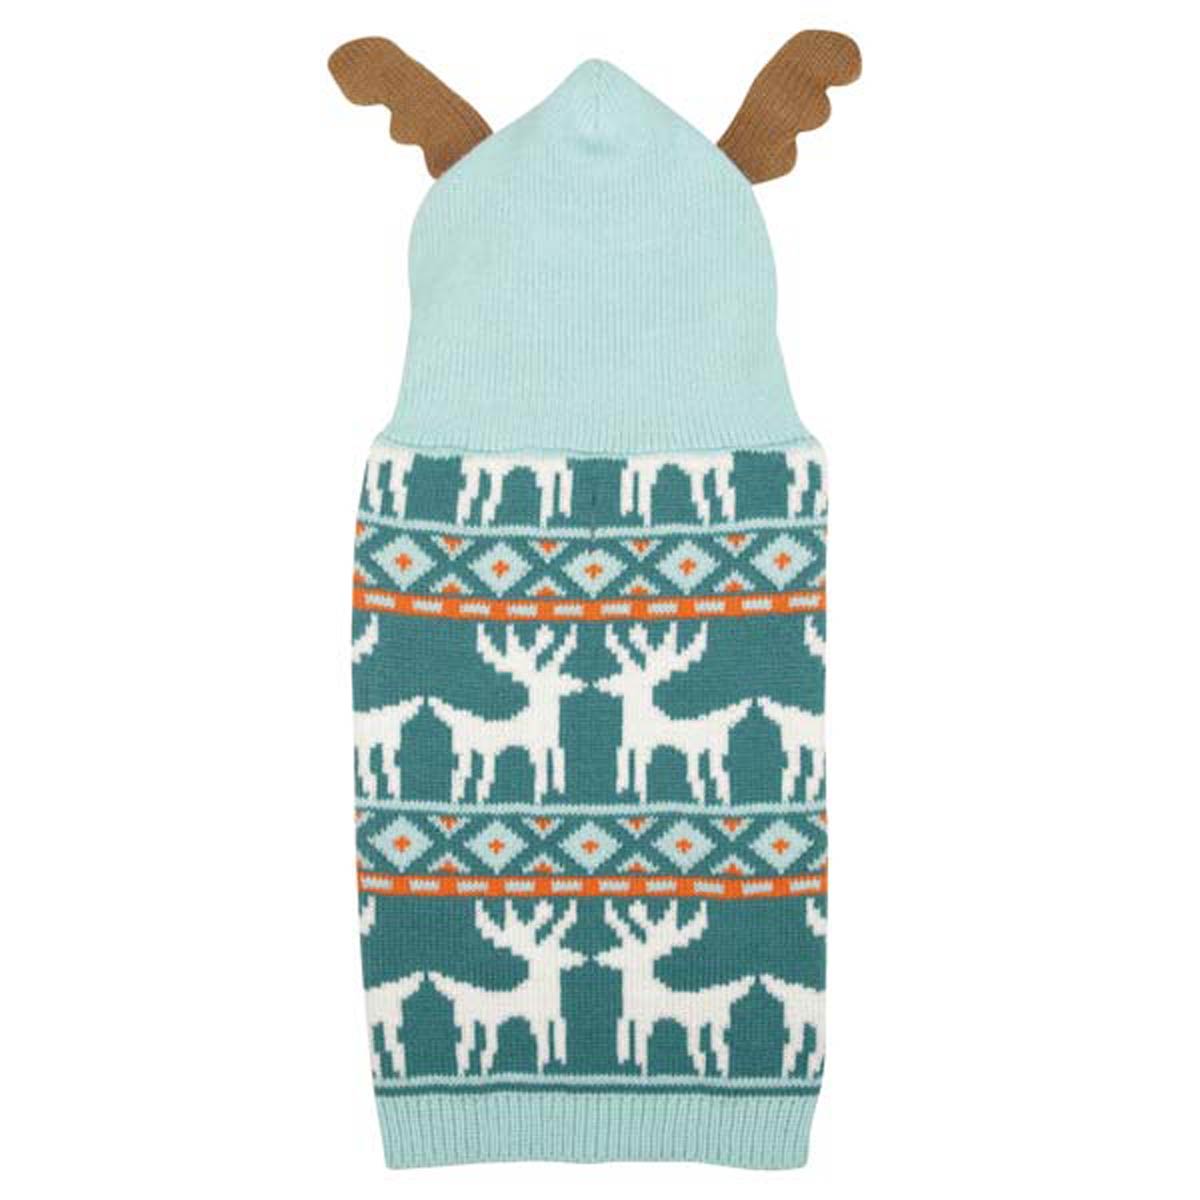 Y Ue975 12 19 Elements Antler Dog Sweater, Teal - Small